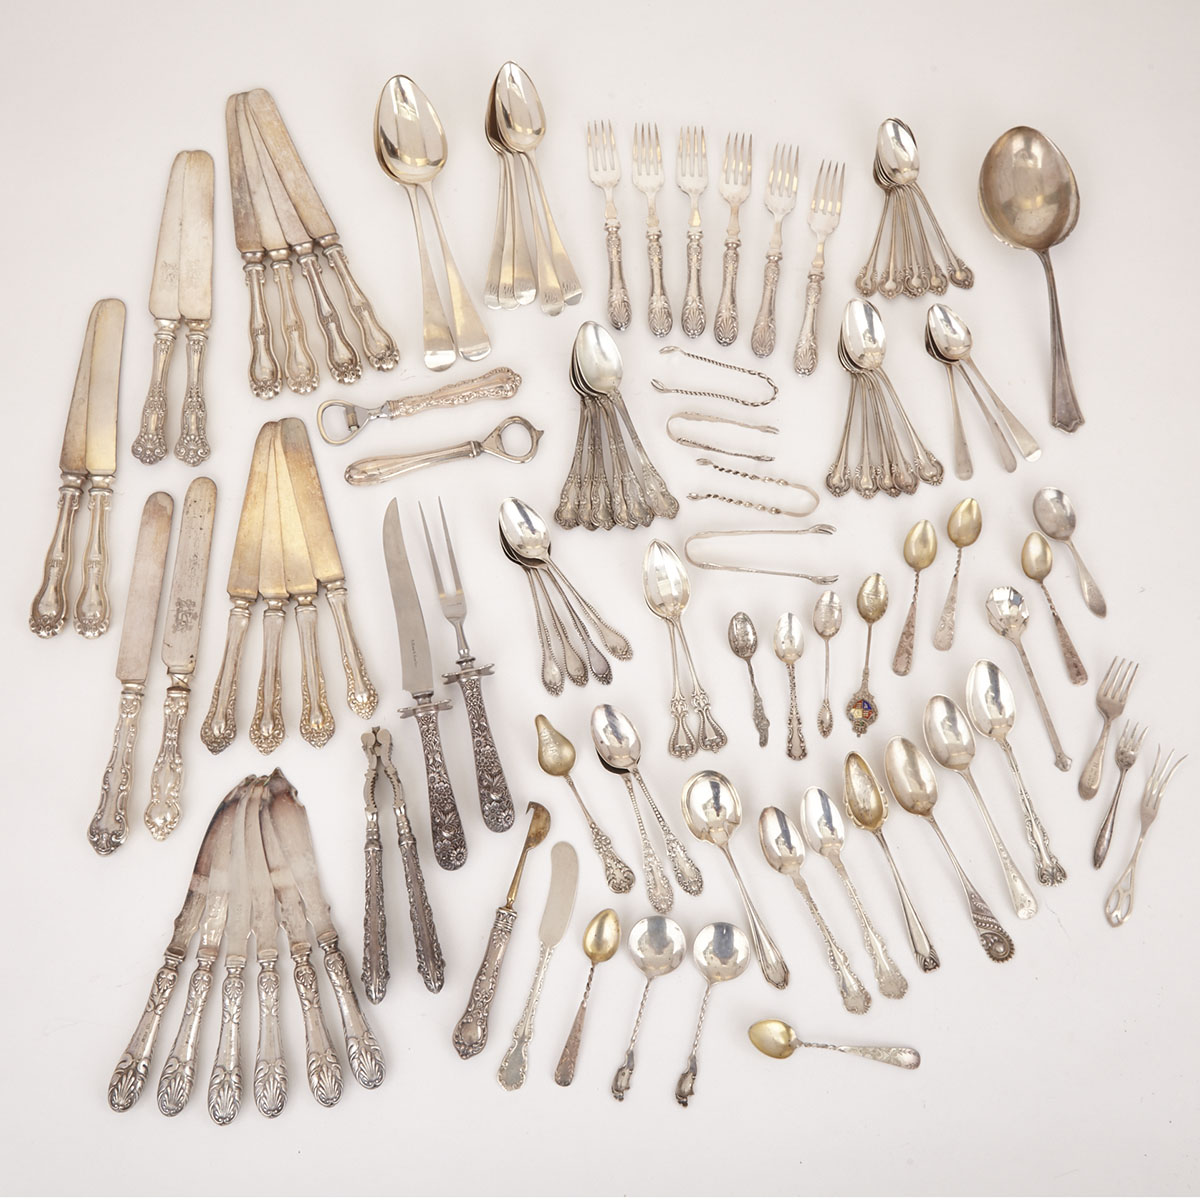 Grouped Lot of English, Scottish and North American Silver Flatware, late 18th/19th/early20th century